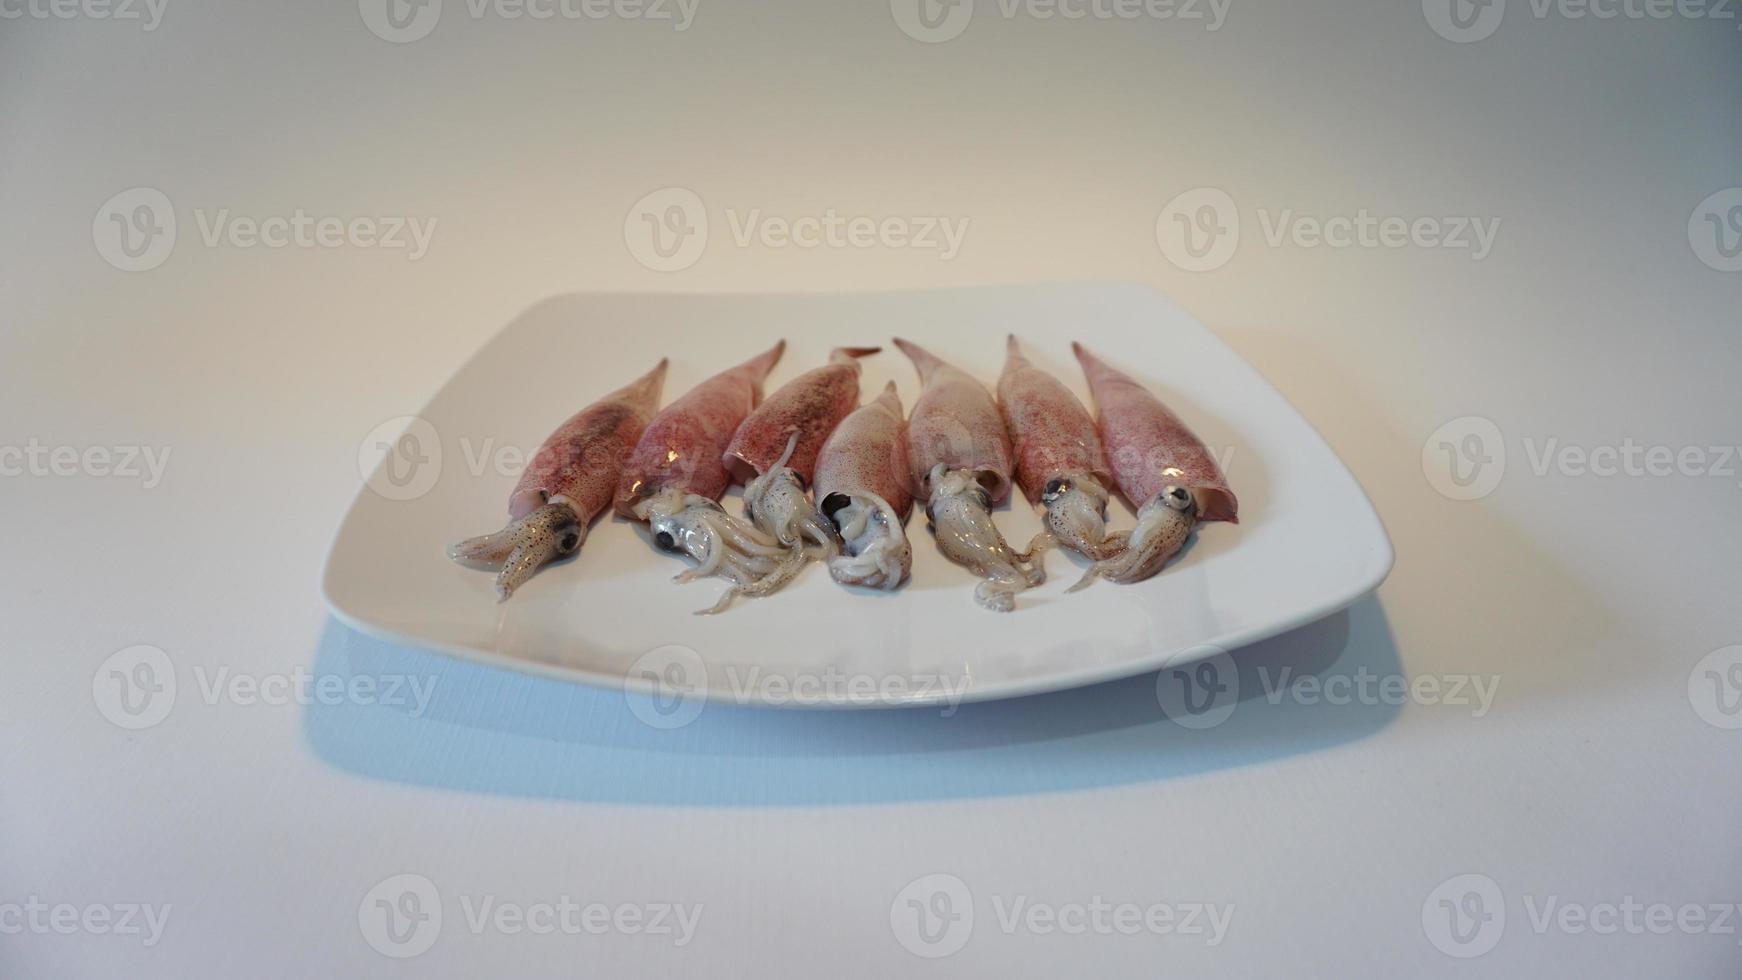 Squid Seafood on plate on white. photo